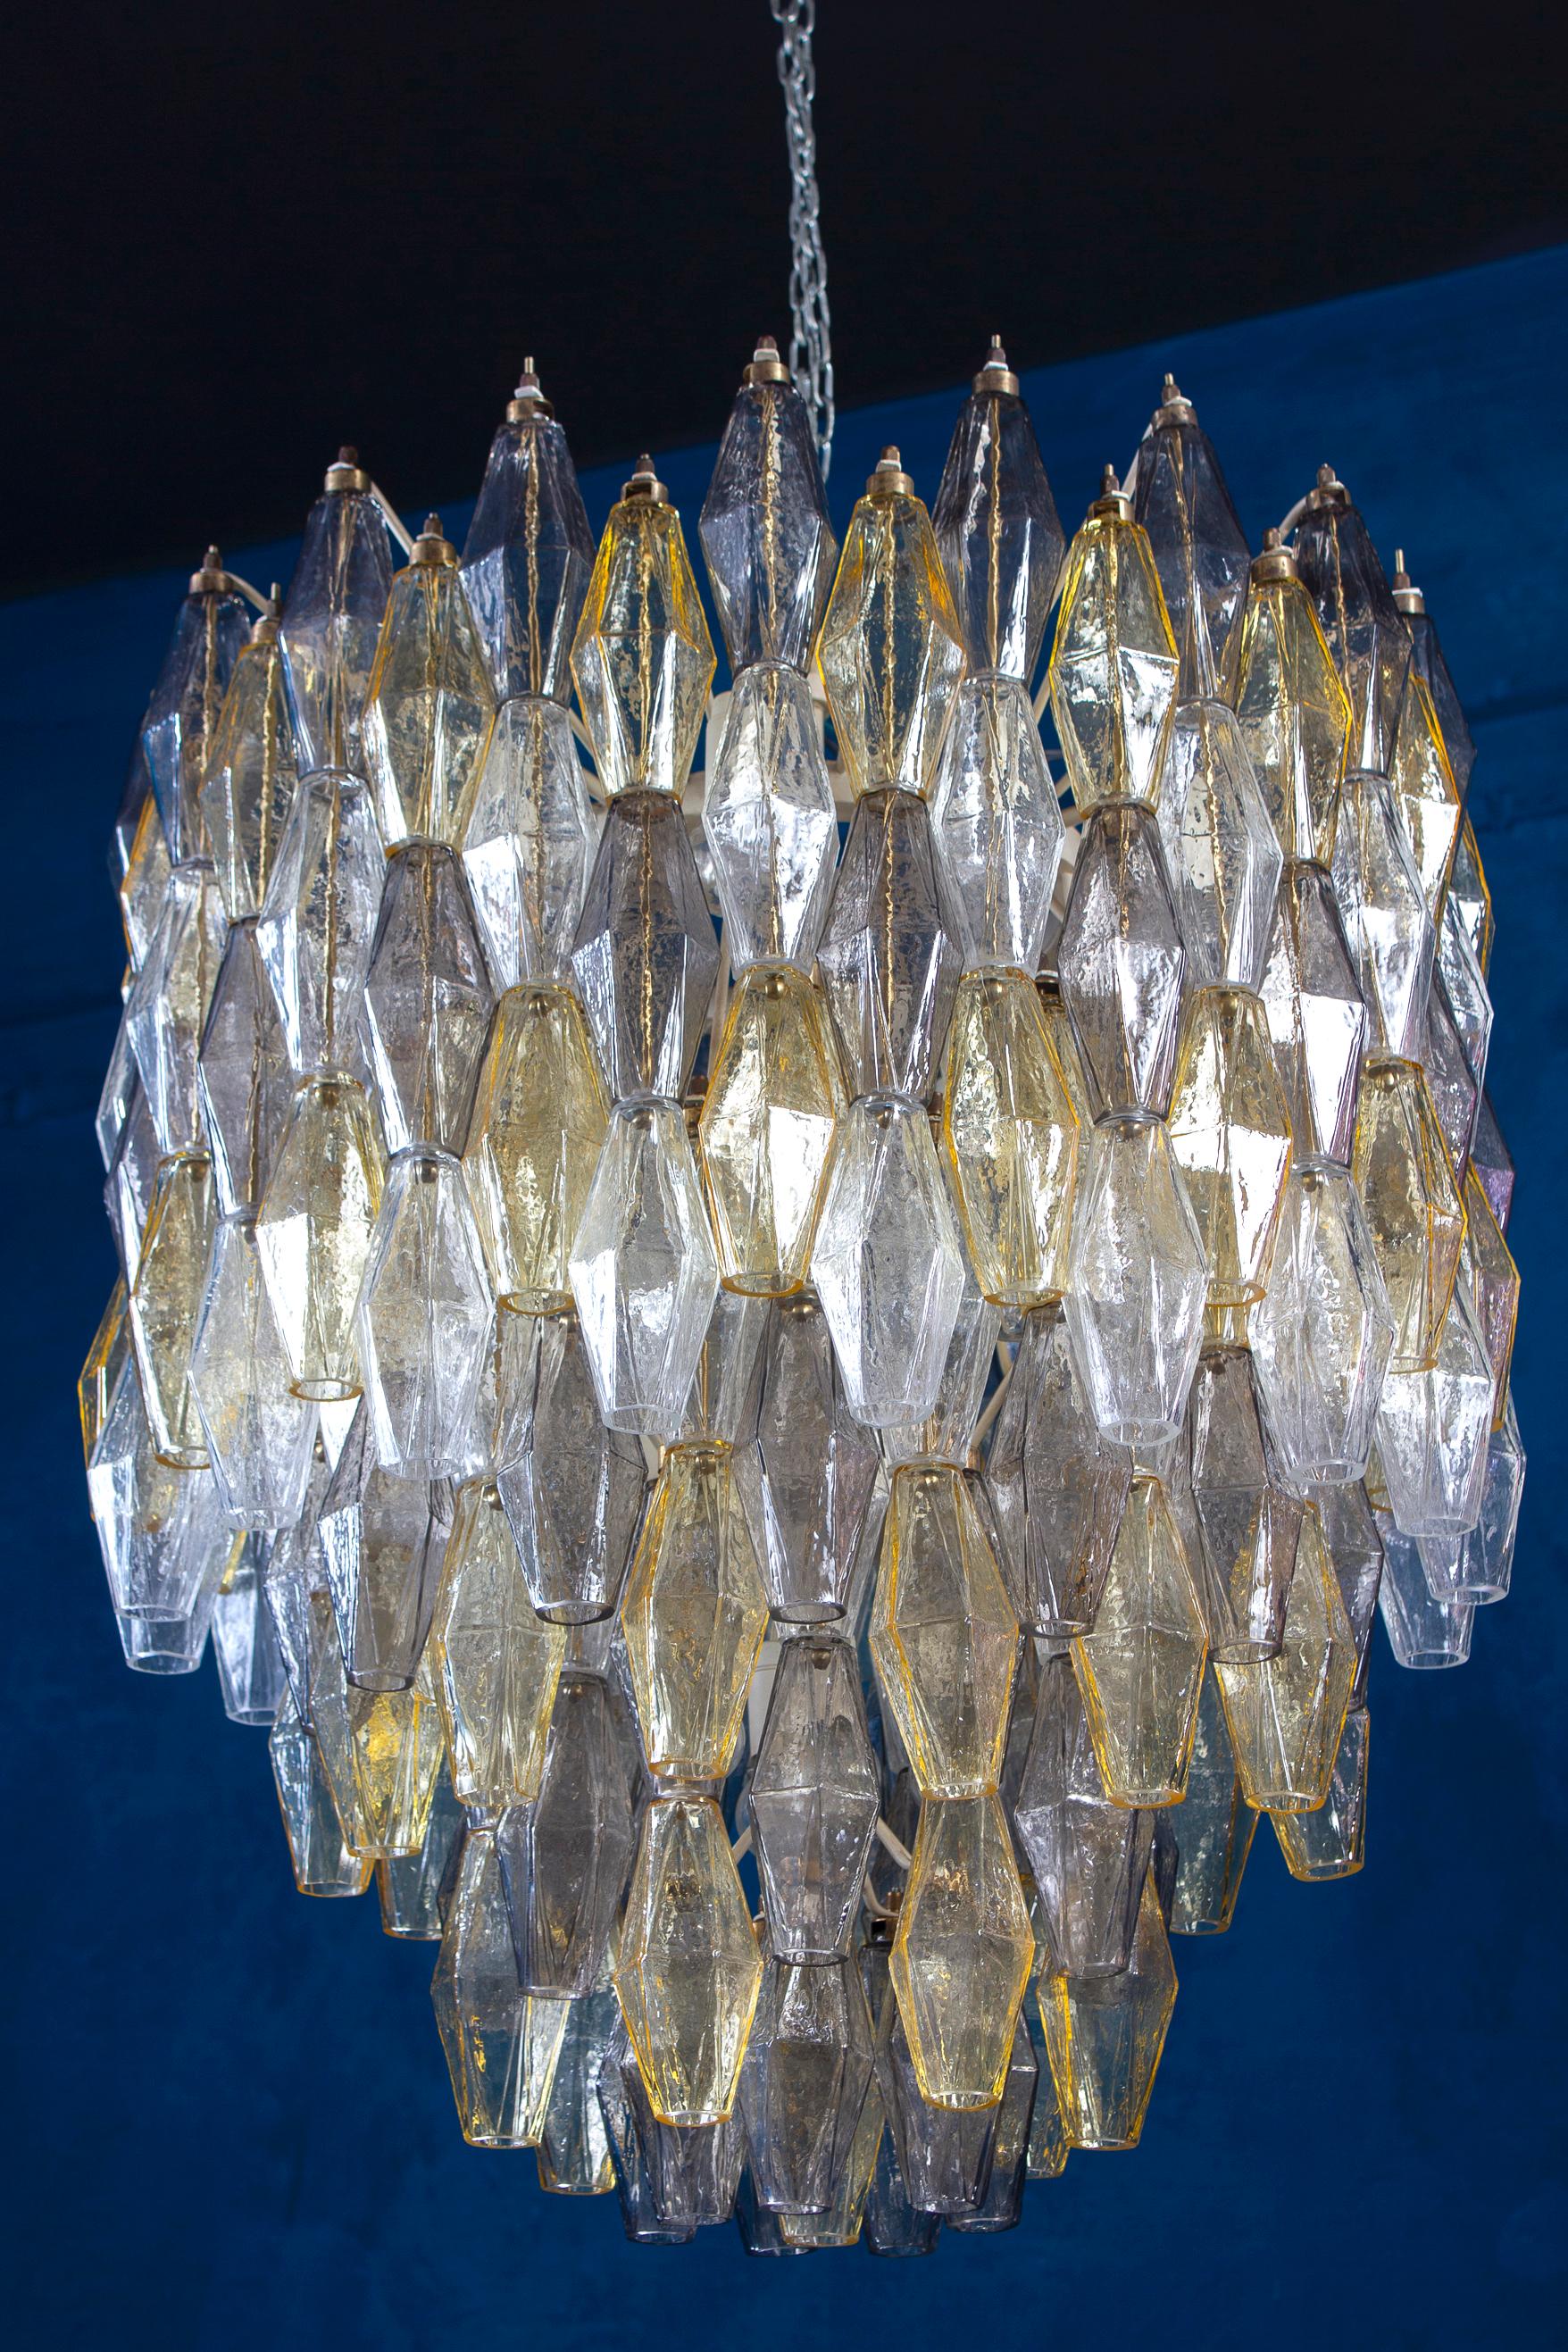 Fabulous original Polyhedral Murano glass chandelier. Rare combination of amber, grey and clear colored poliedri hanging from the metal tiers at several levels.
Ivory painted round shaped frame in very good and fully original condition.
The